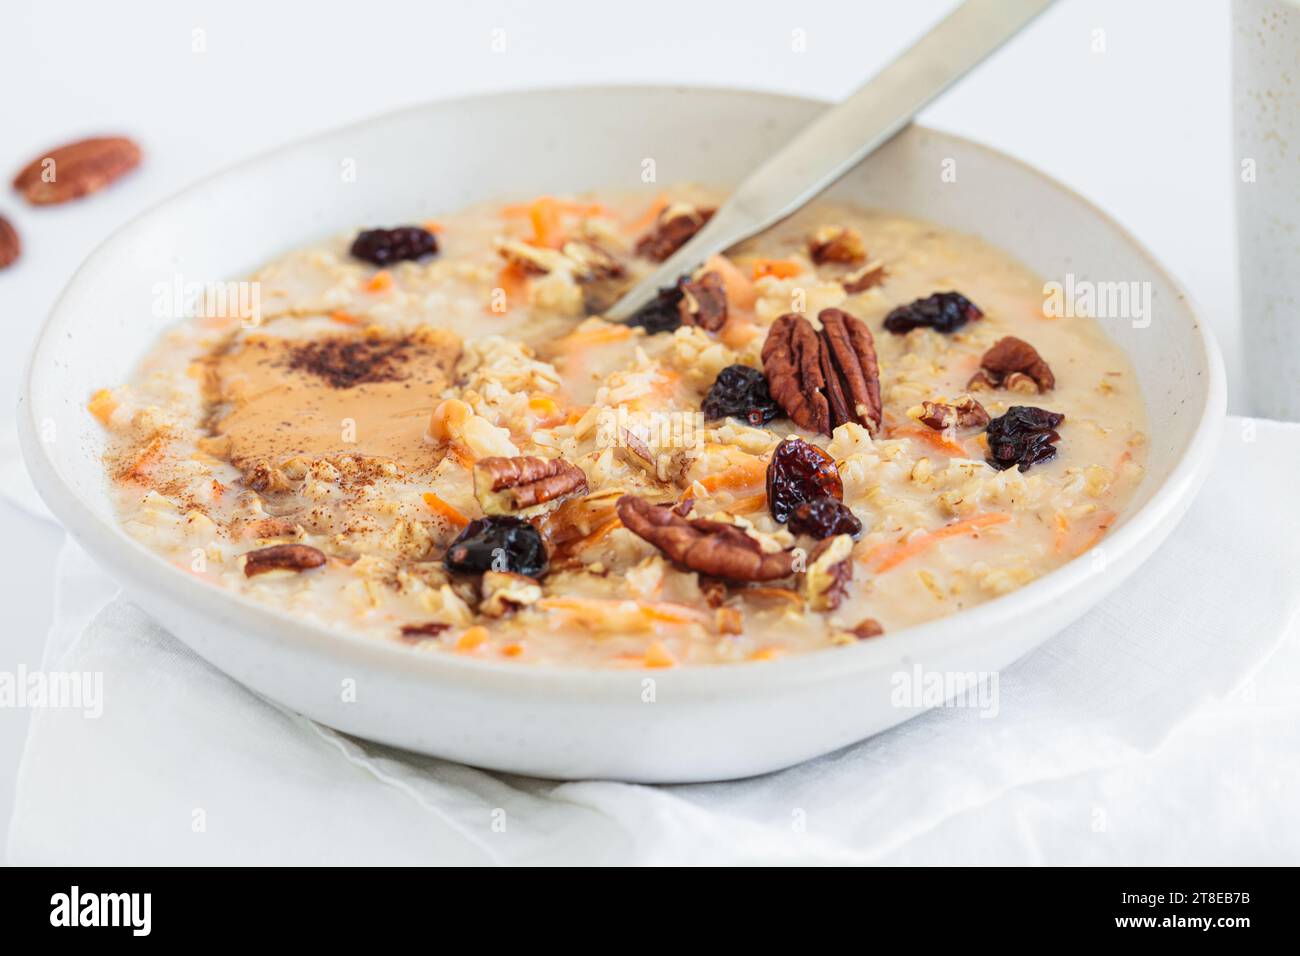 Carrot cake oatmeal with dried cranberries, pecans and peanut butter in a white plate, white background. Nutritious healthy winter breakfast concept. Stock Photo